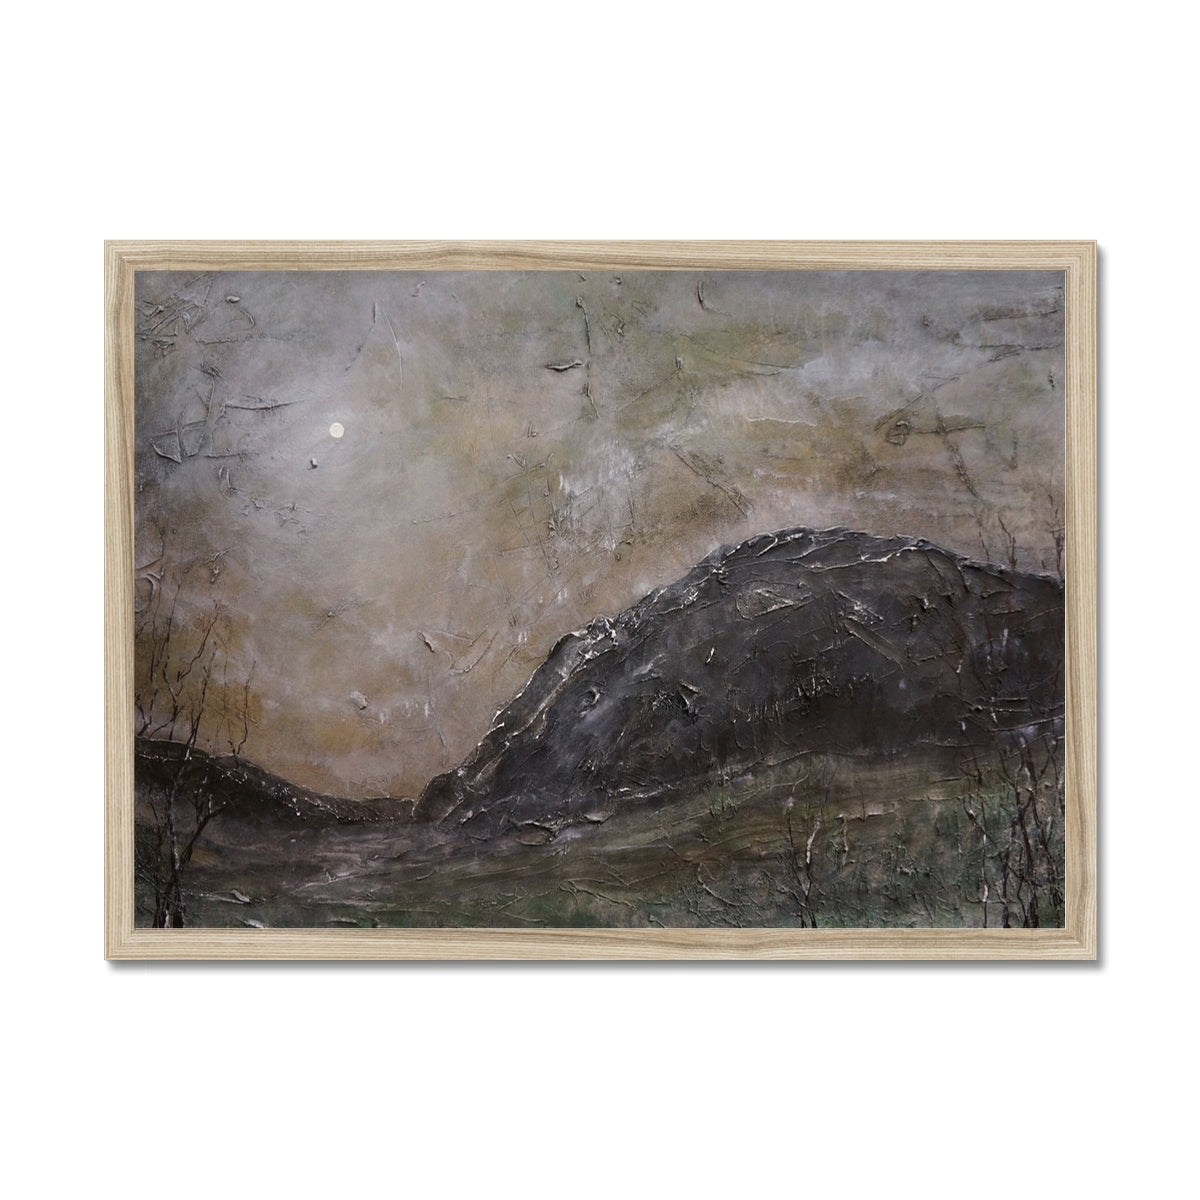 Glen Nevis Moonlight Painting | Framed Prints From Scotland-Framed Prints-Scottish Lochs & Mountains Art Gallery-A2 Landscape-Natural Frame-Paintings, Prints, Homeware, Art Gifts From Scotland By Scottish Artist Kevin Hunter